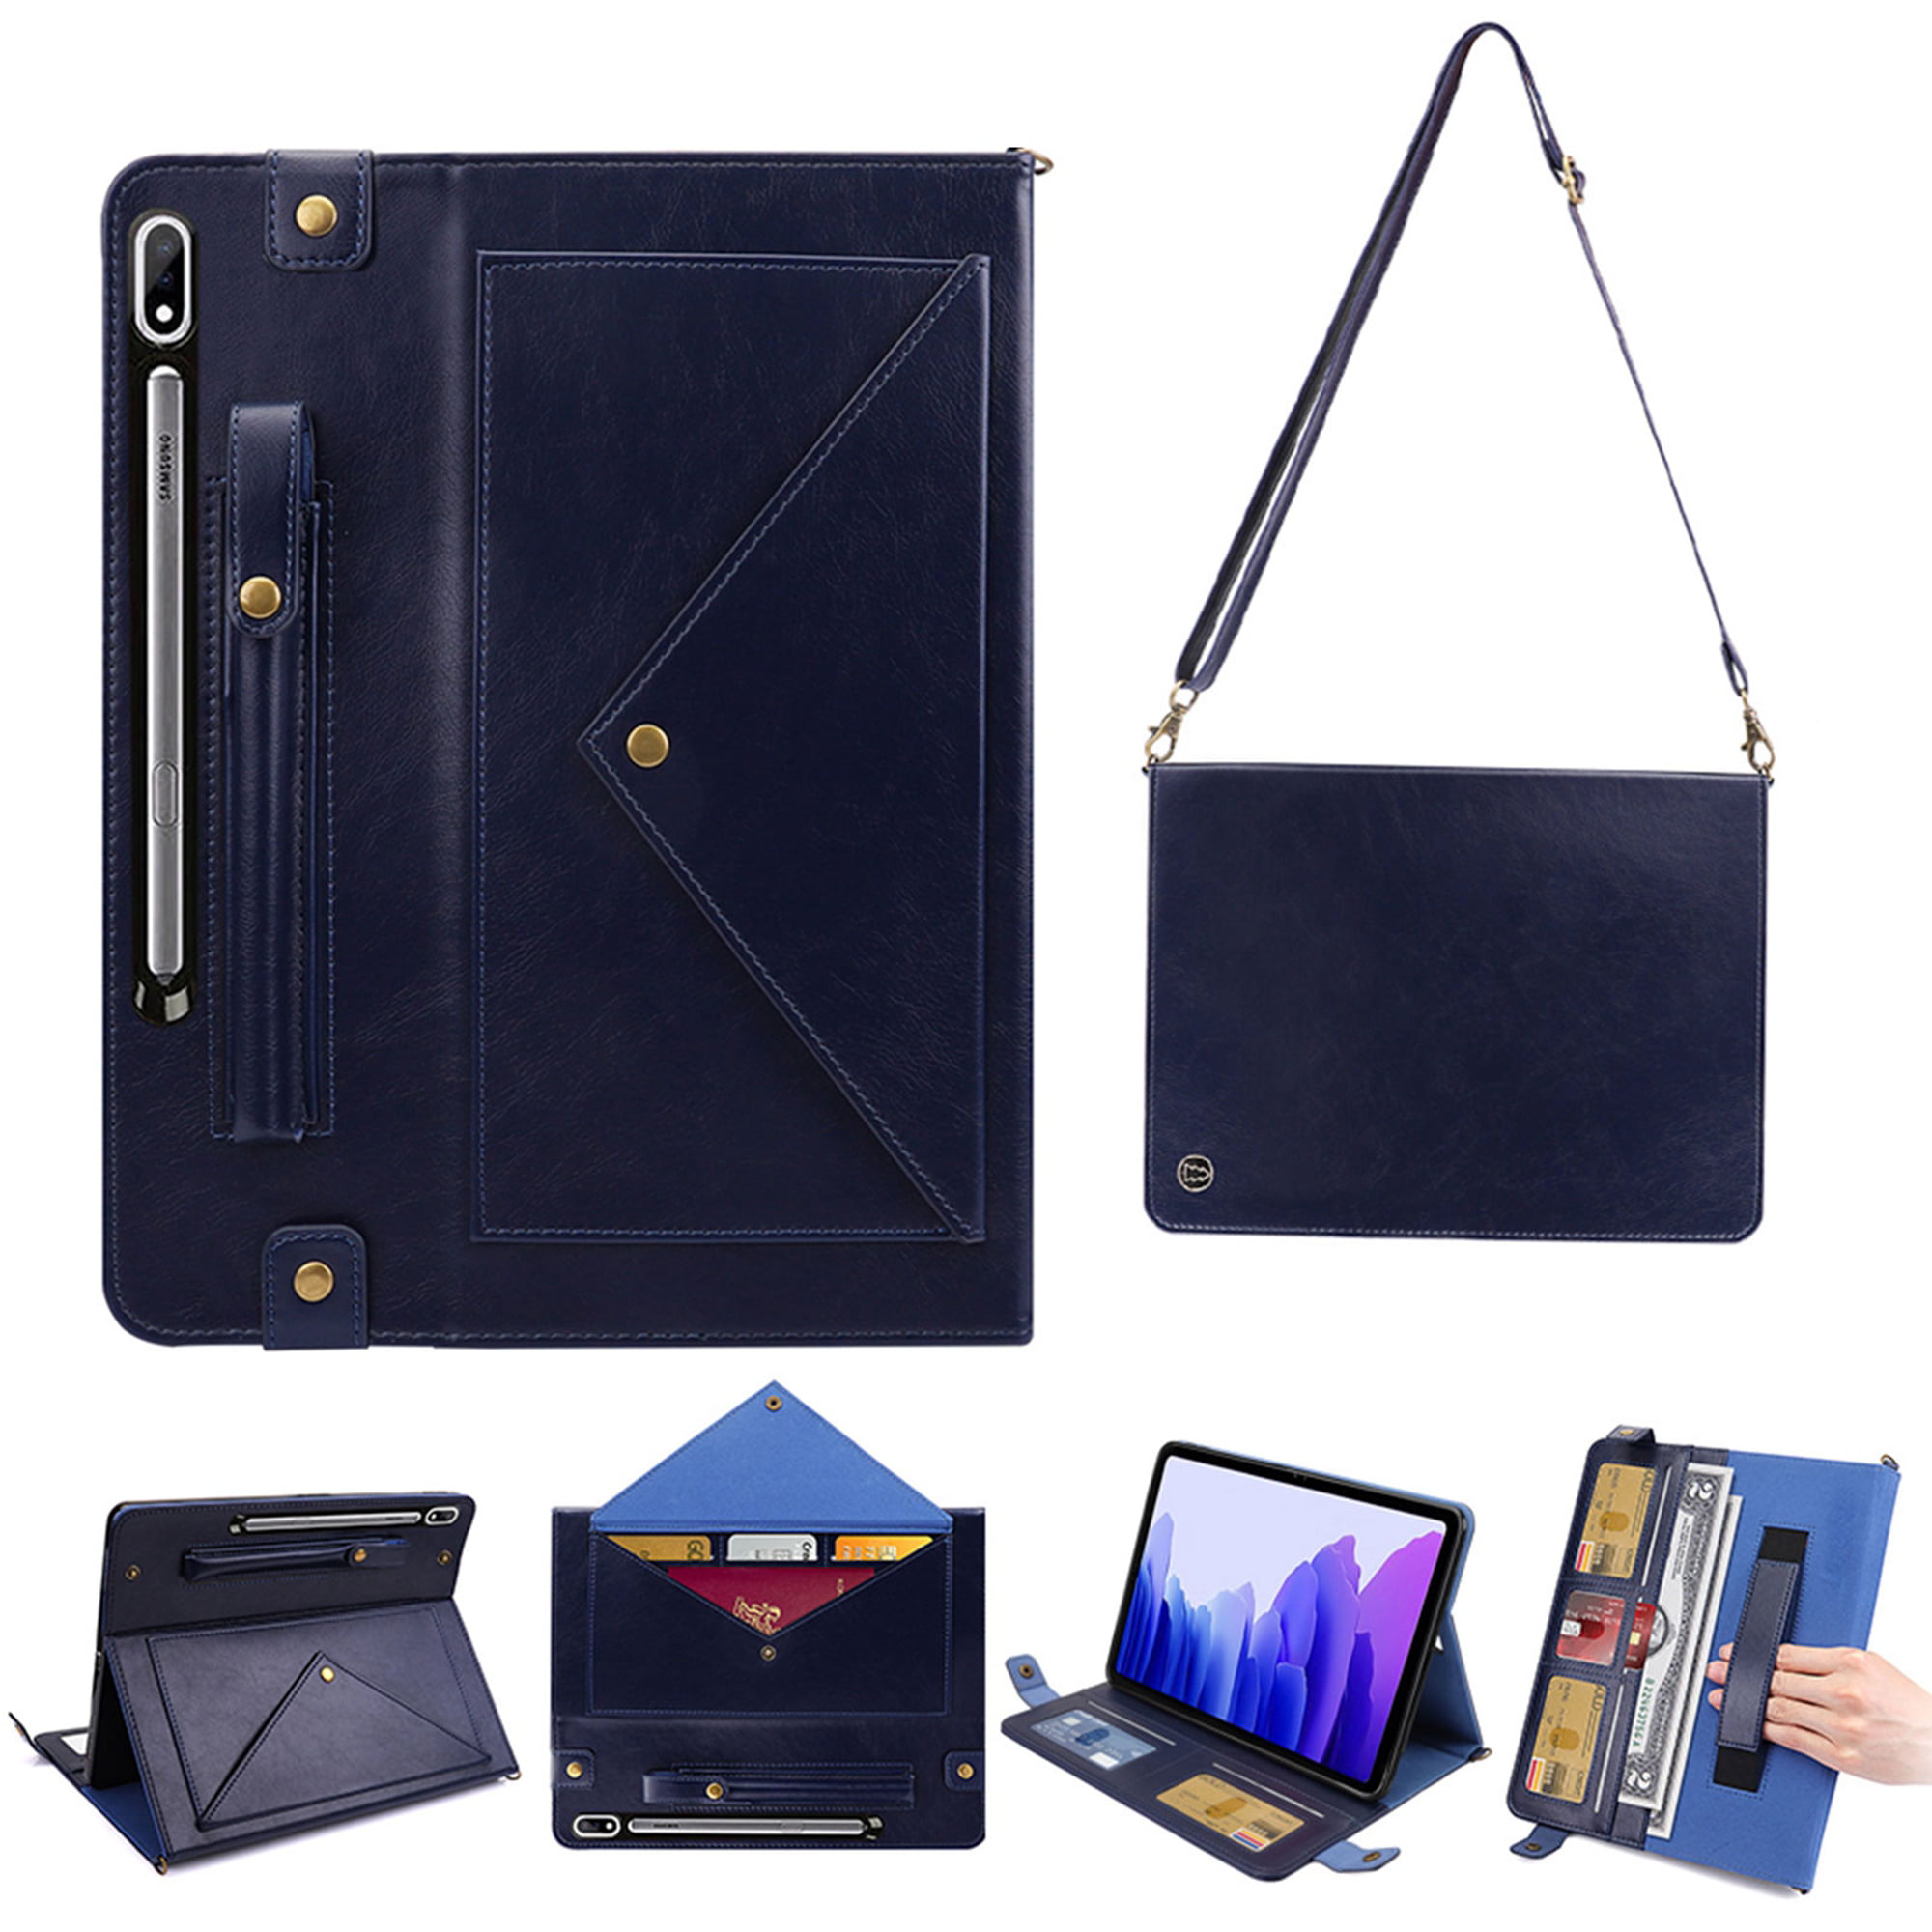 Pen Holder , Auto Sleep/Wake Card Slots Uliking Case for Samsung Galaxy Tab S7 11 inch 2020 Kickstand Smart Cover Fit Galaxy Tab S7 11 2020 Love Tree T870/T875/T876